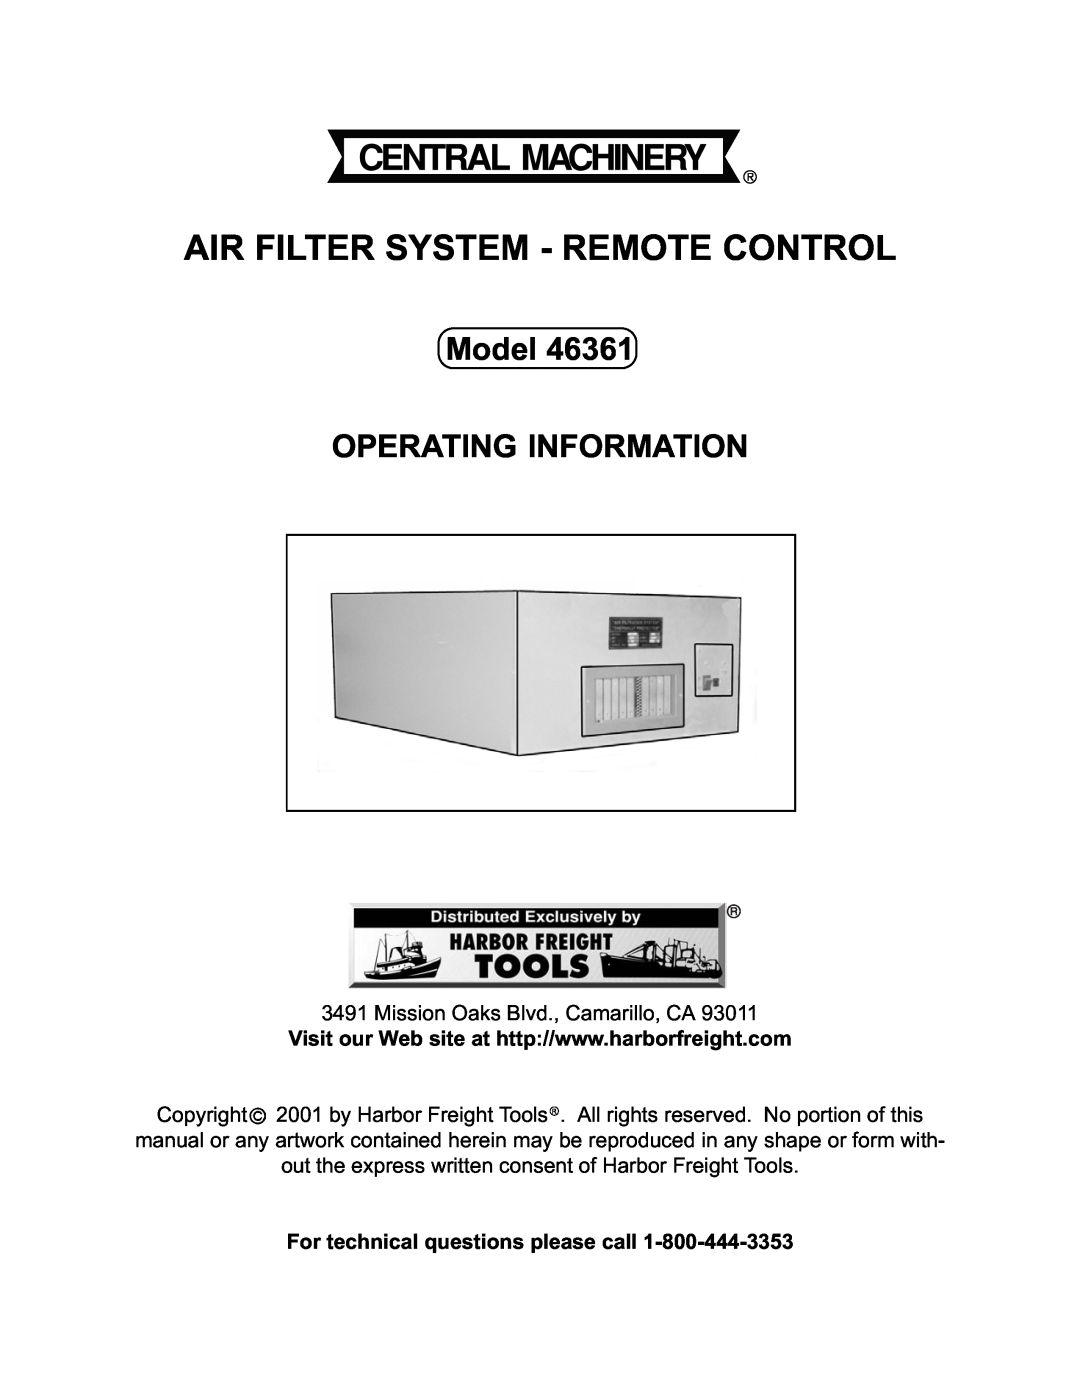 Harbor Freight Tools 46361 manual Model OPERATING INFORMATION, Air Filter System - Remote Control 